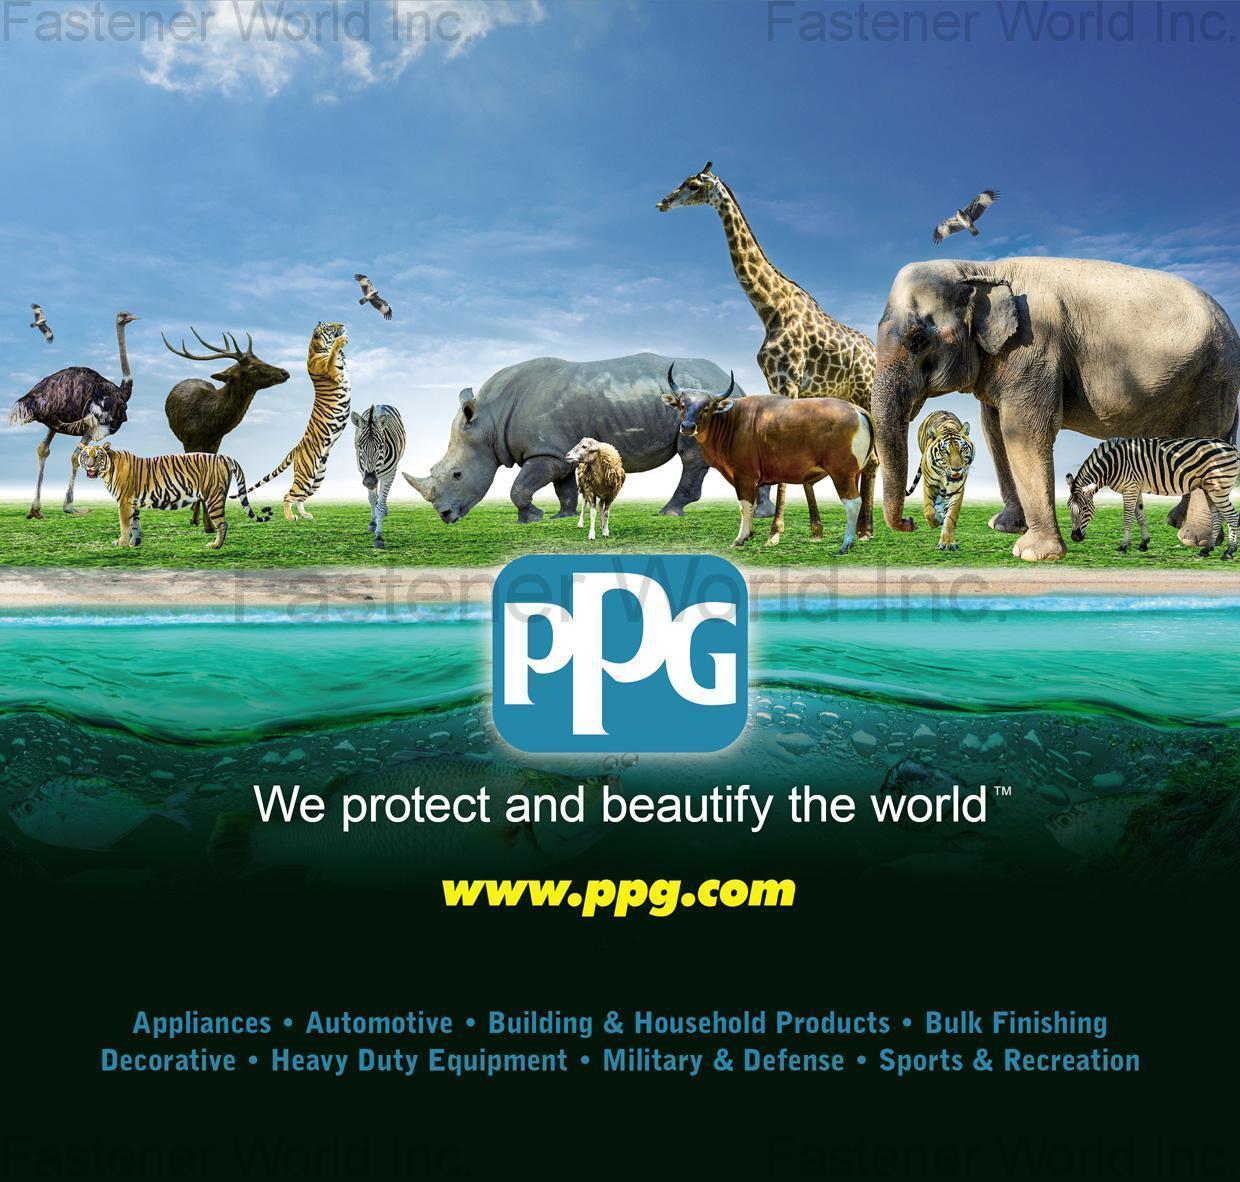 PPG INDUSTRIES INTERNATIONAL INC. TAIWAN BRANCH , PPG Electrocoat Technologies, PPG Anodic Epoxy Electrocoat Products, PPG Anodic Acrylic Electrocoat Products, PPG Cathodic Epoxy Electrocoat Products, PPG Cathodic Acrylic Electrocoat Products